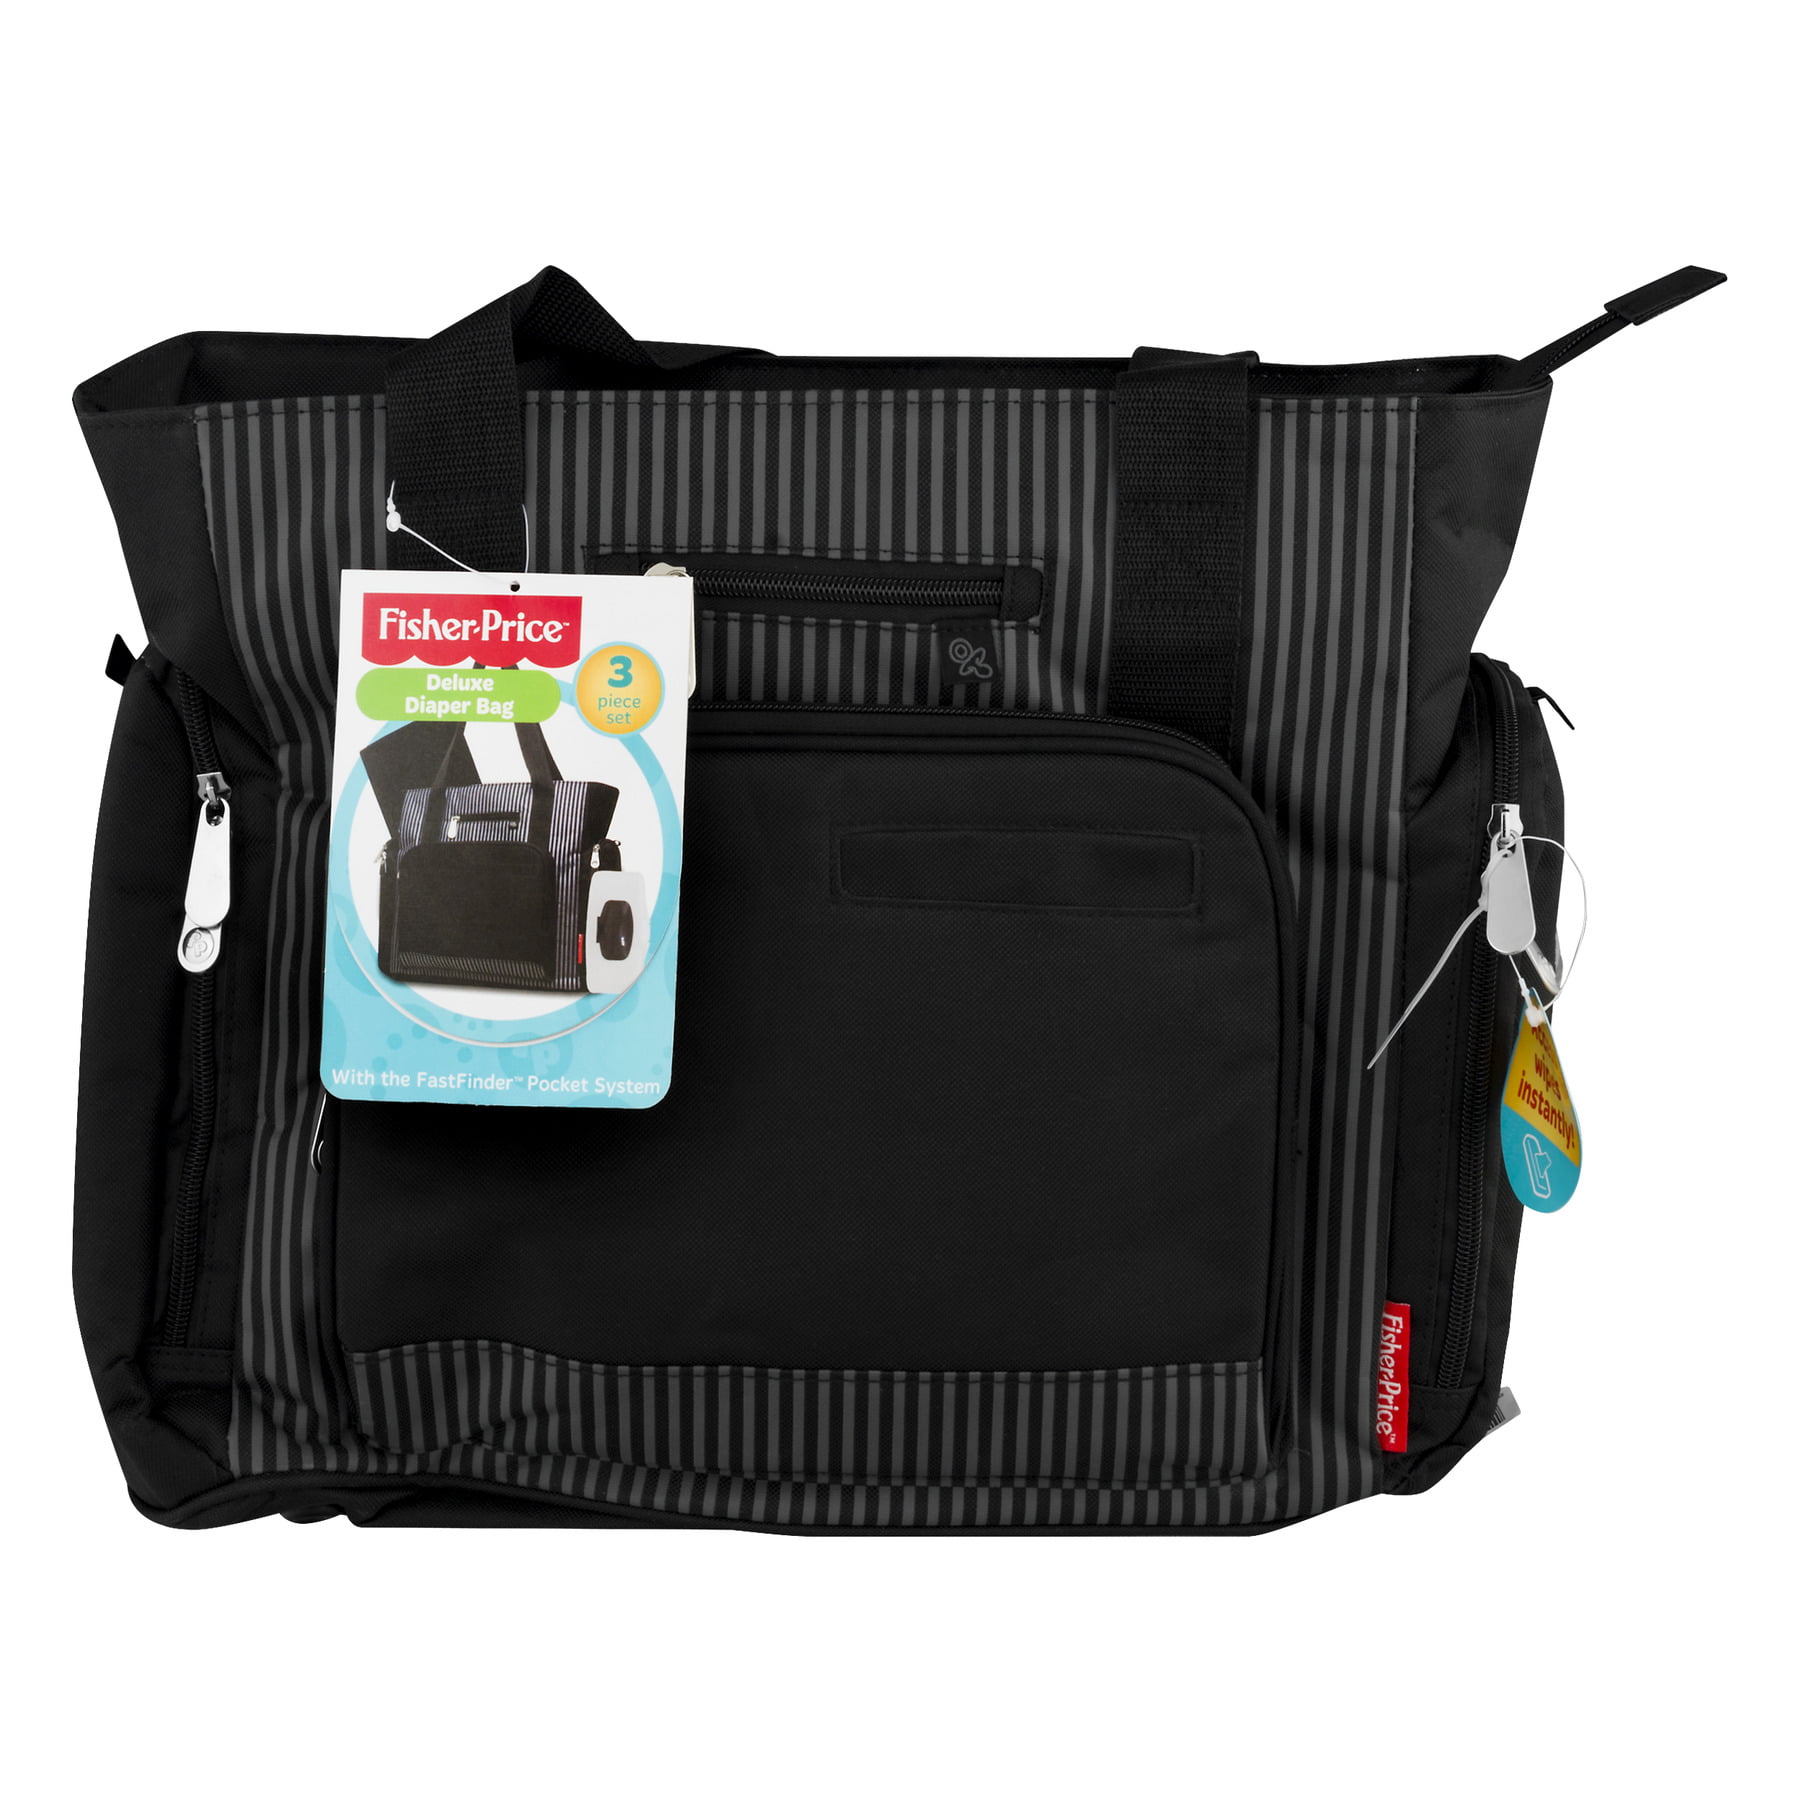 Fisher-Price Tote Diaper Bag with Fastfind Pocket System, Black - 0 - 0